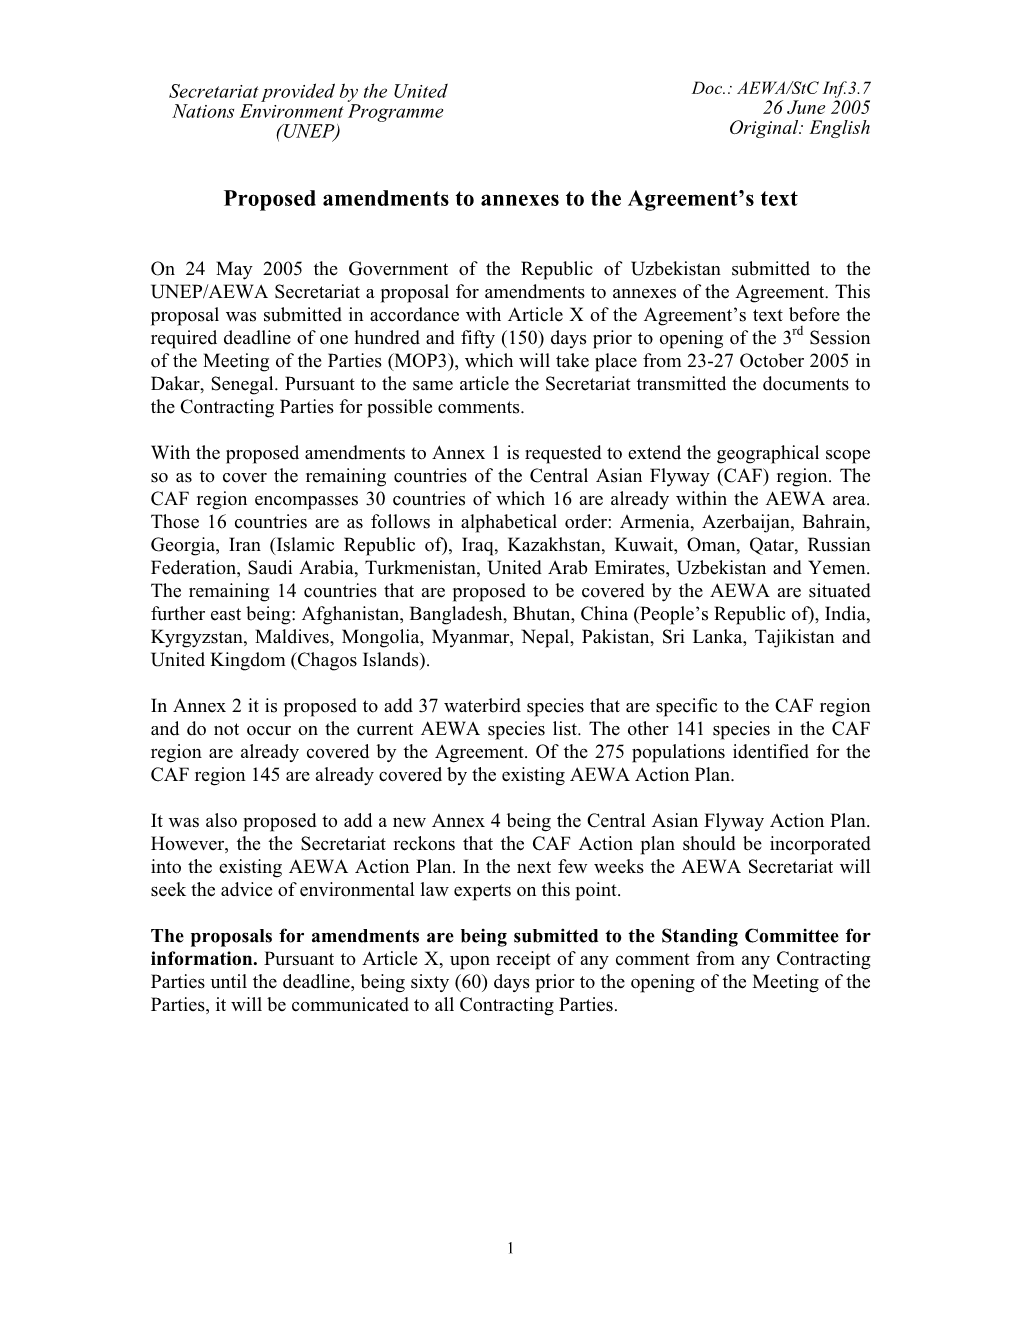 Proposed Amendments to Annexes to the Agreement's Text